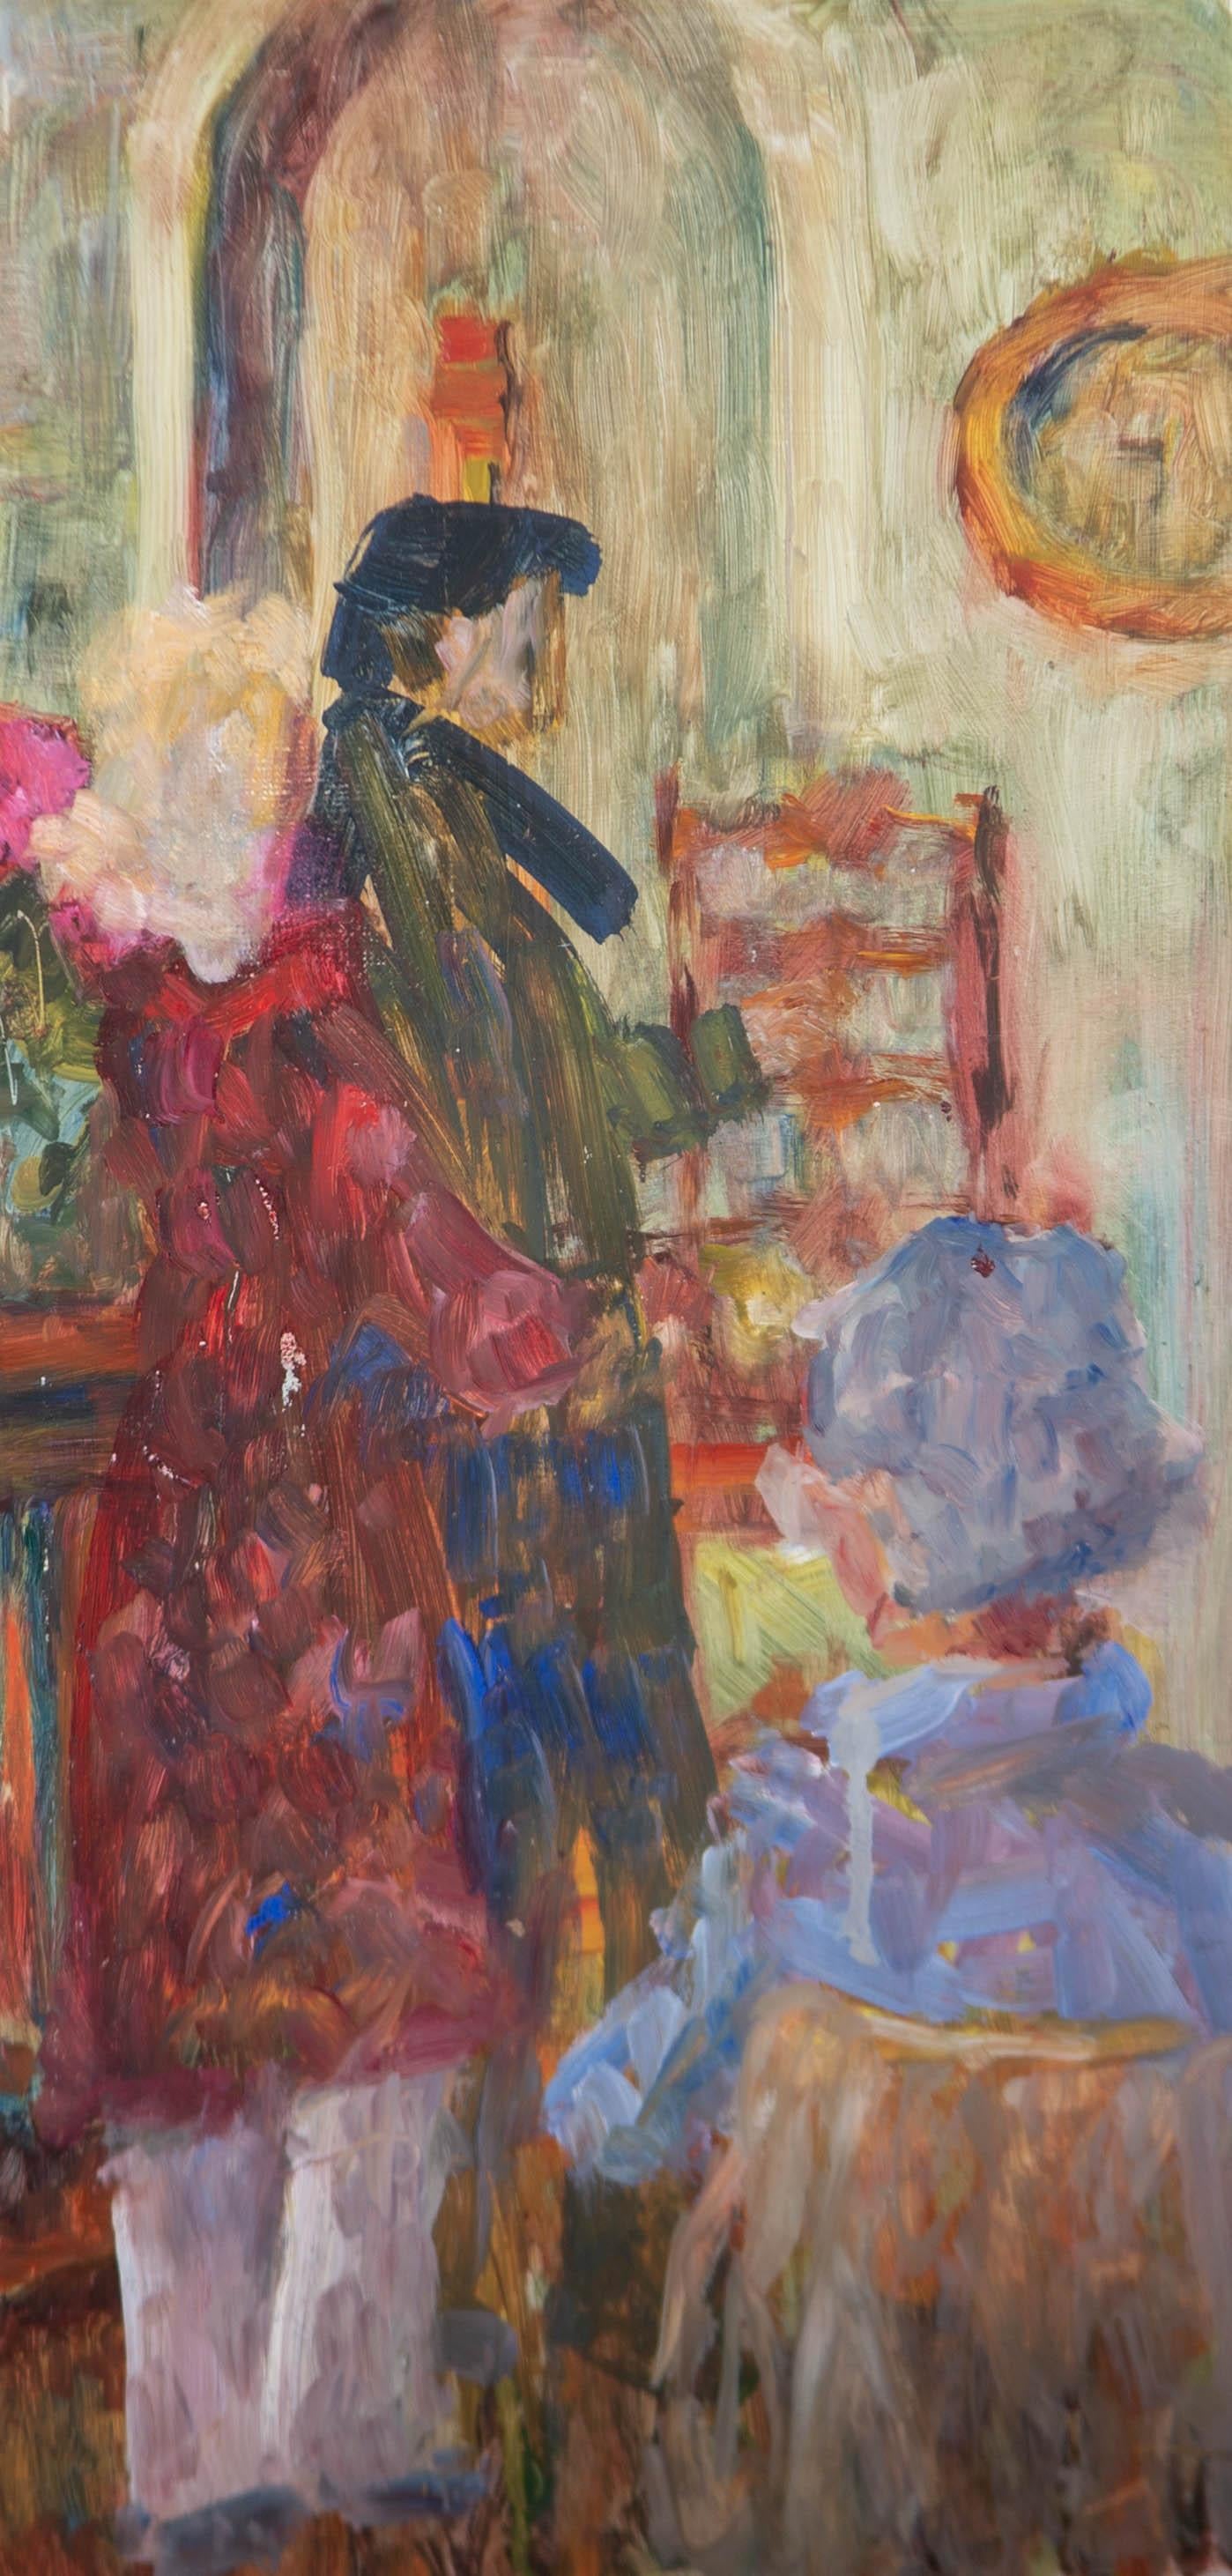 A dynamic and vibrant impressionistic interior scene full of narrative and movement, showing a couple donning their scarves and coats as they head towards the door after a visit with an elderly woman who sits with her back to the viewer.

The